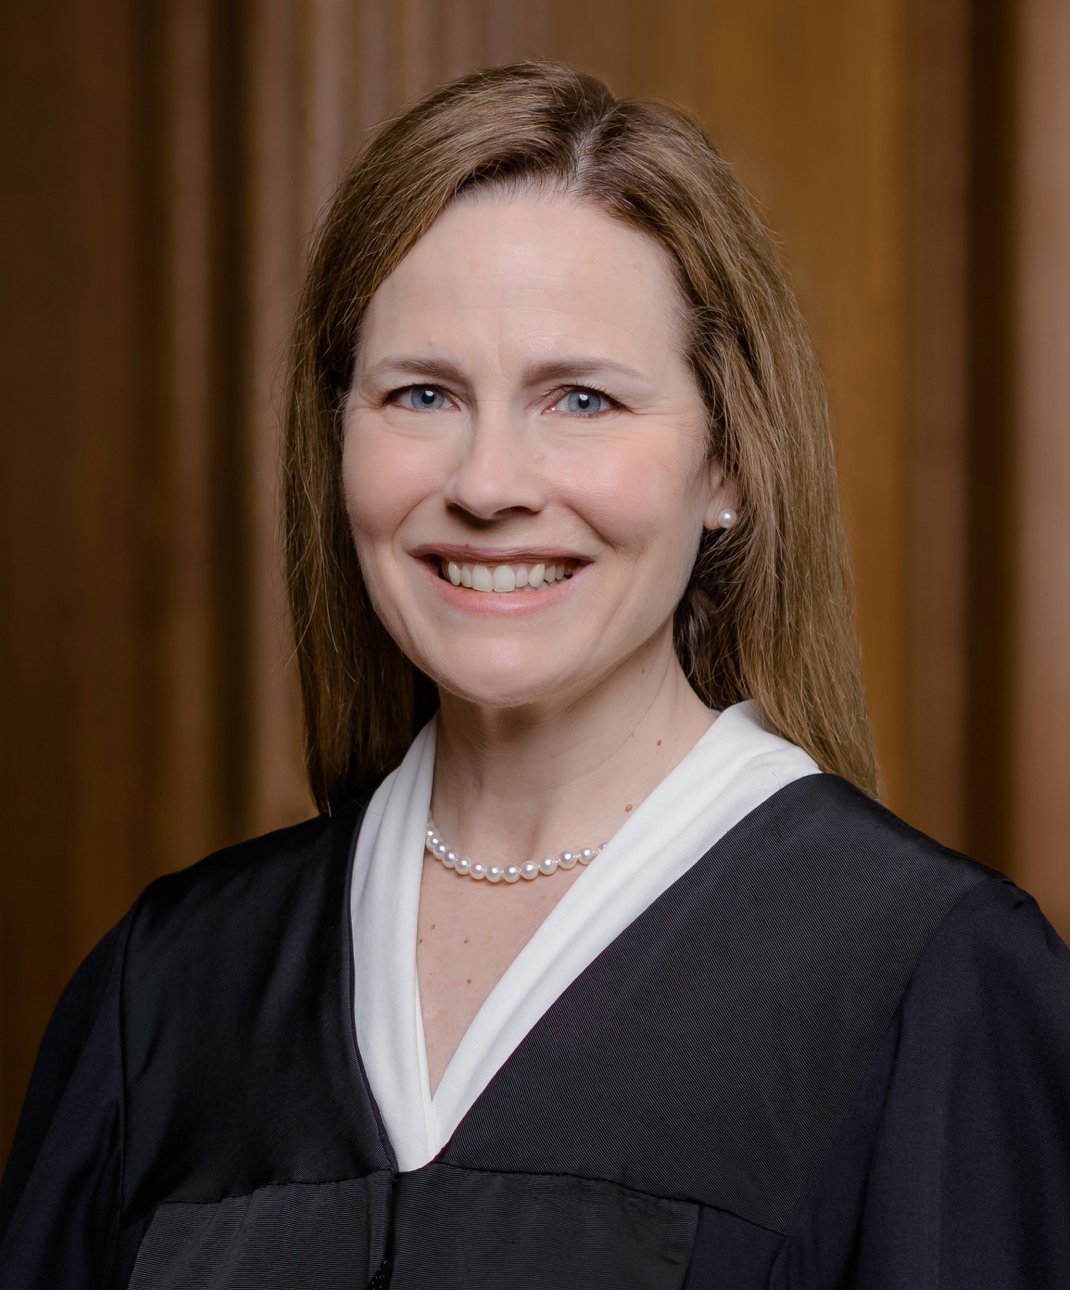 Amy Coney Barrett, like 5 of her colleagues was appointed by a President that lost the popular vote.